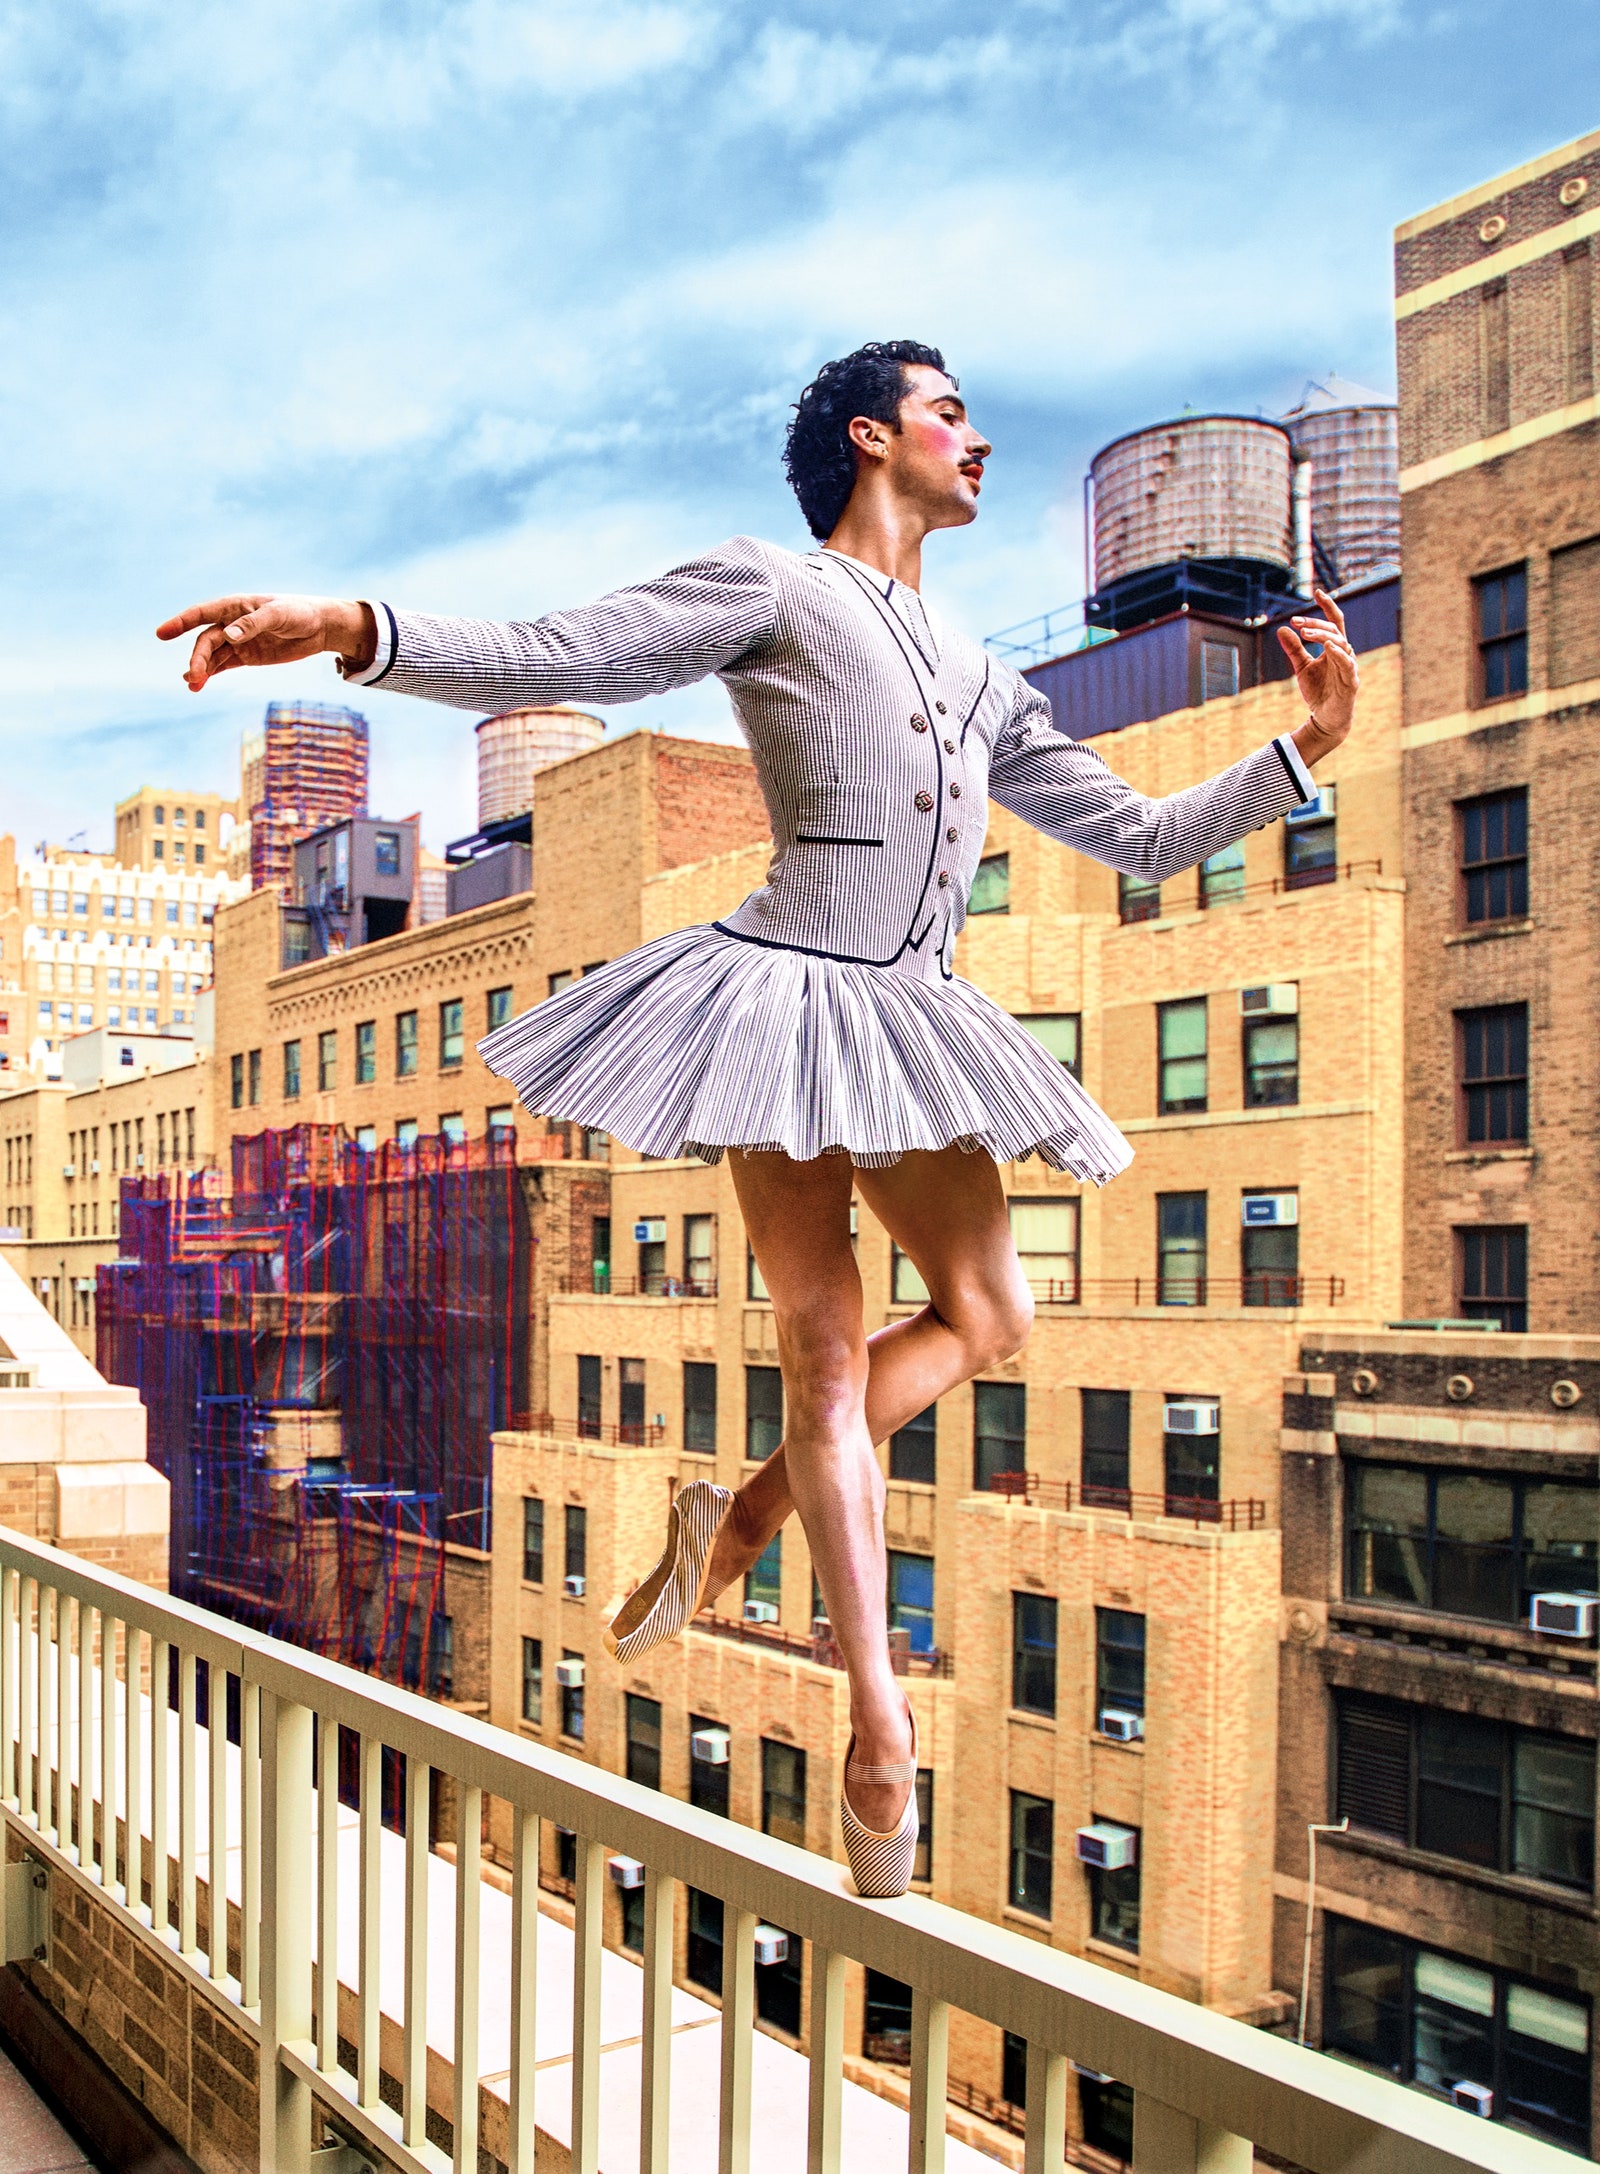 A male ballet dancer wears a lavender sweater and skirt while balancing on the railing of a balcony.